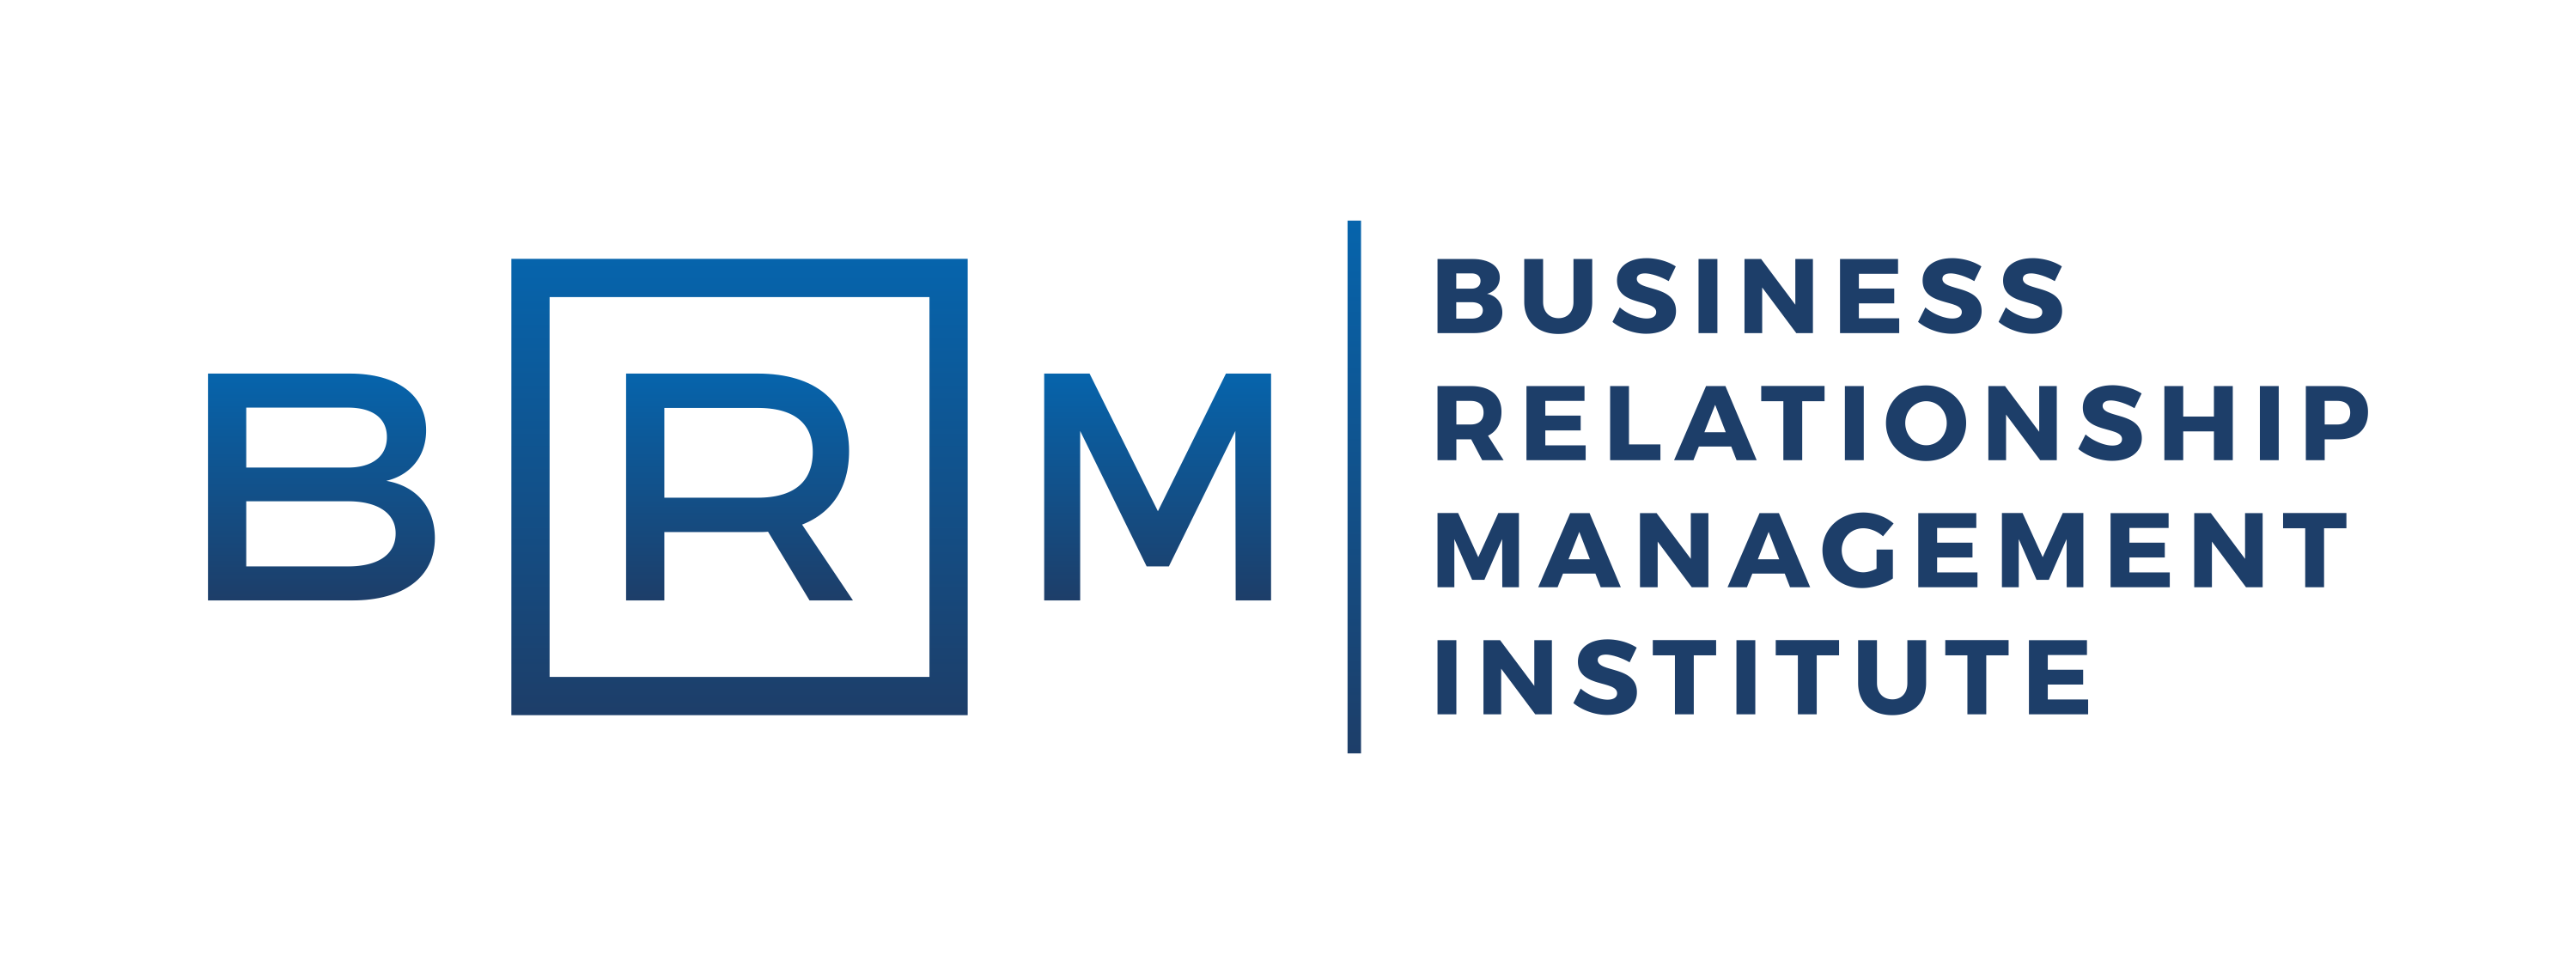 Watermark Learning is endorsed by Business Relationship Management Institute as a Certified Training Provider